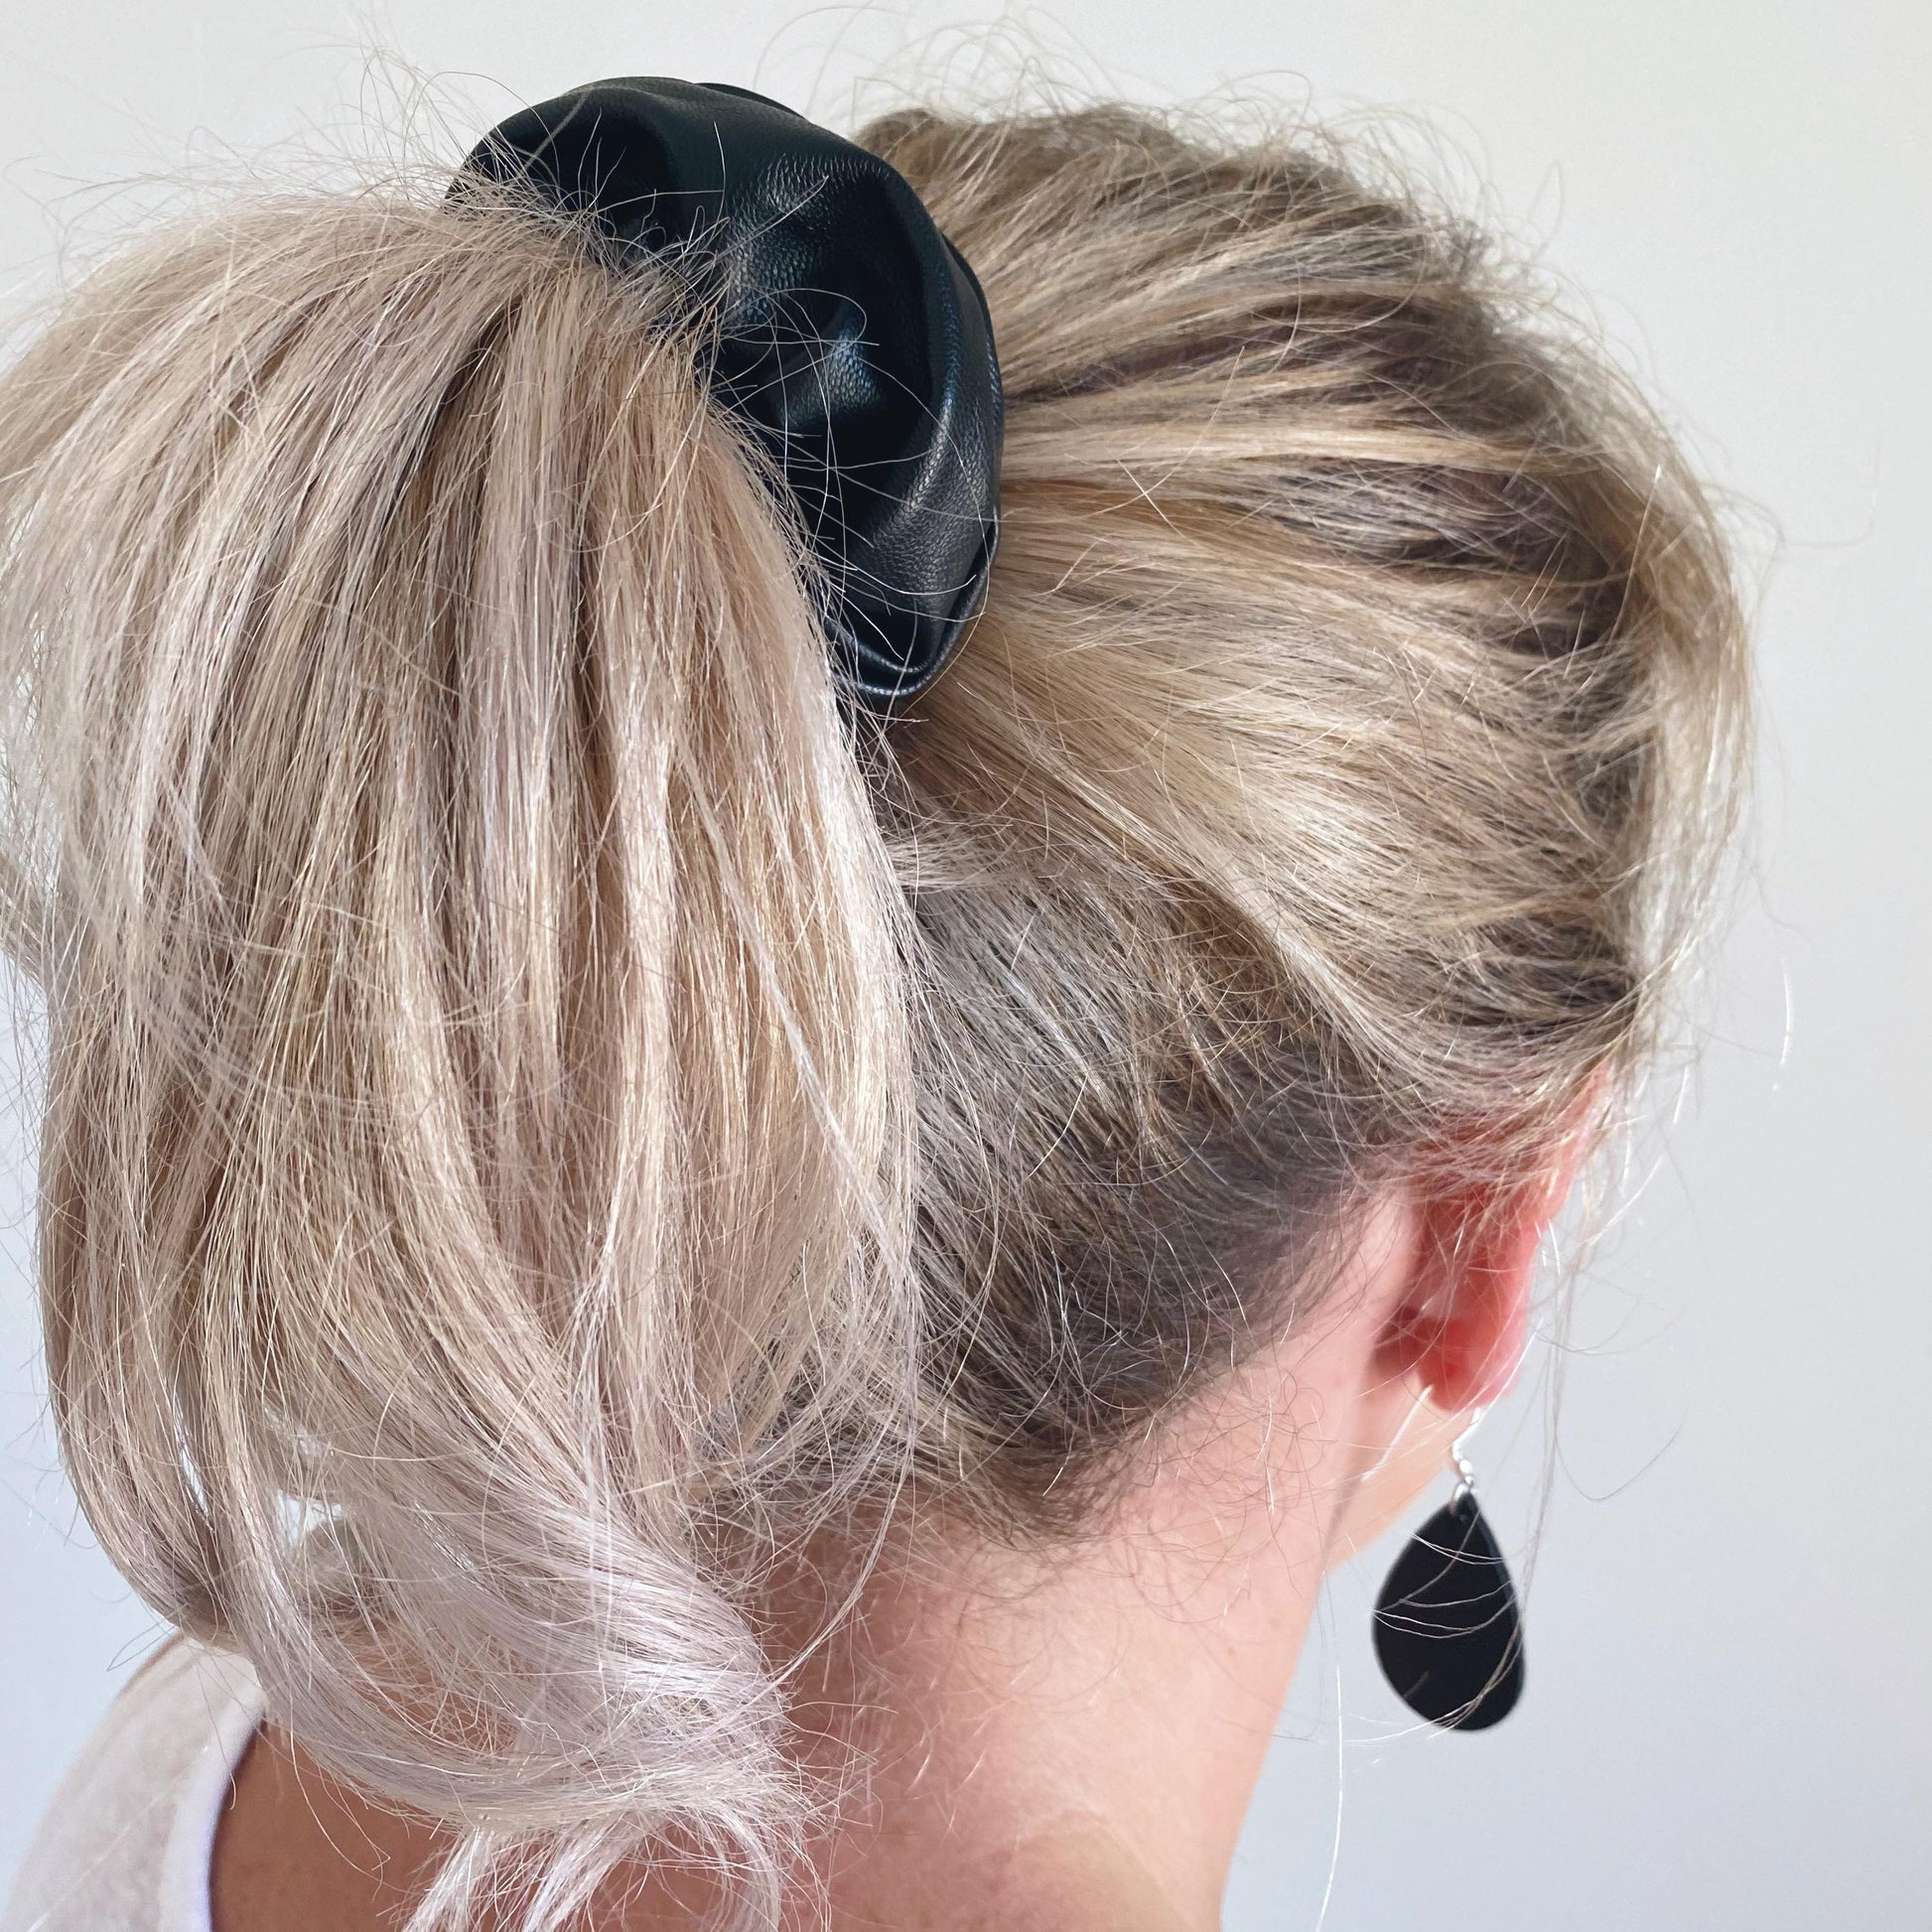 Black faux leather hair scrunchie in ponytail